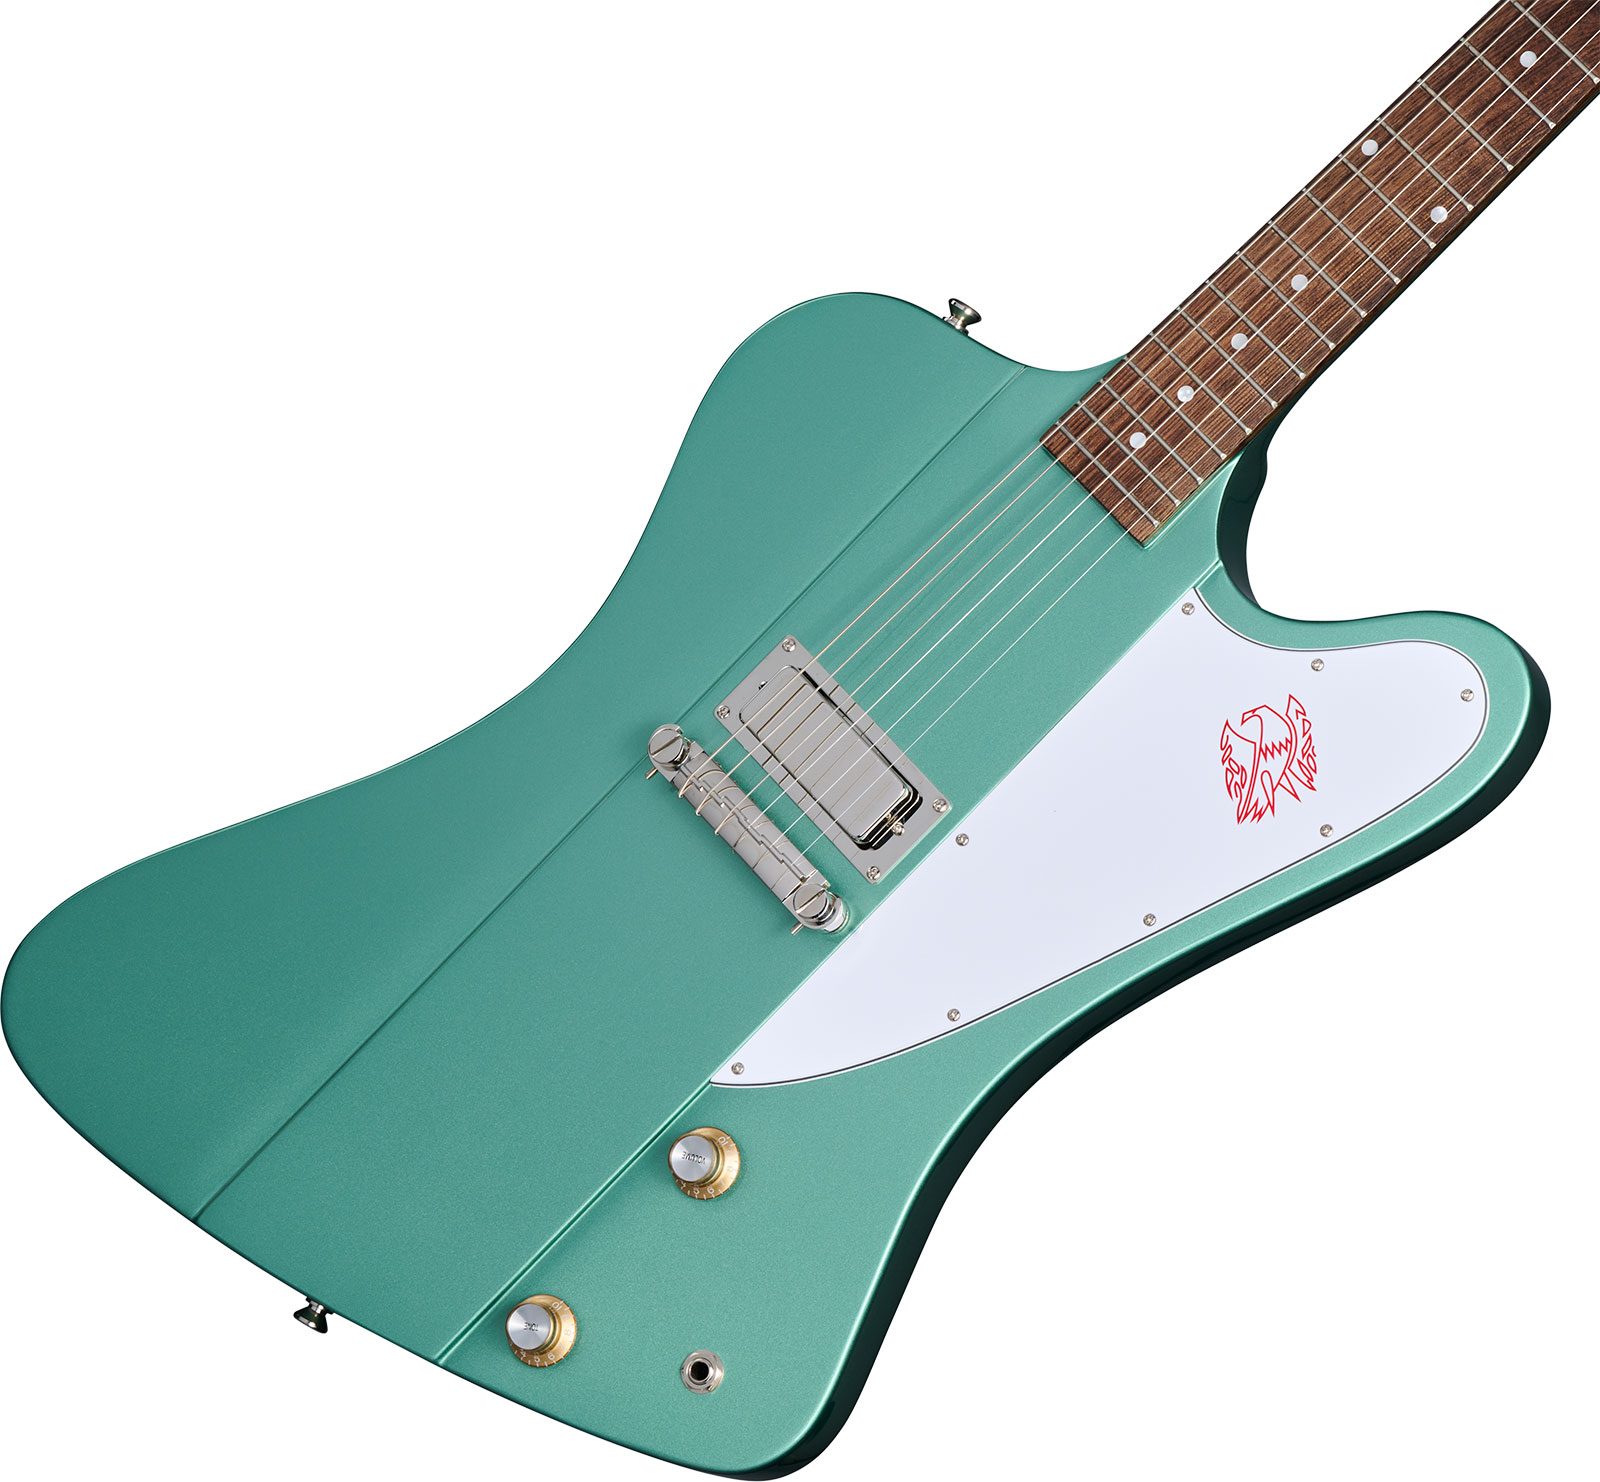 Epiphone Firebird I 1963 Inspired By Gibson Custom 1mh Ht Lau - Inverness Green - Guitare Électrique RÉtro Rock - Variation 3